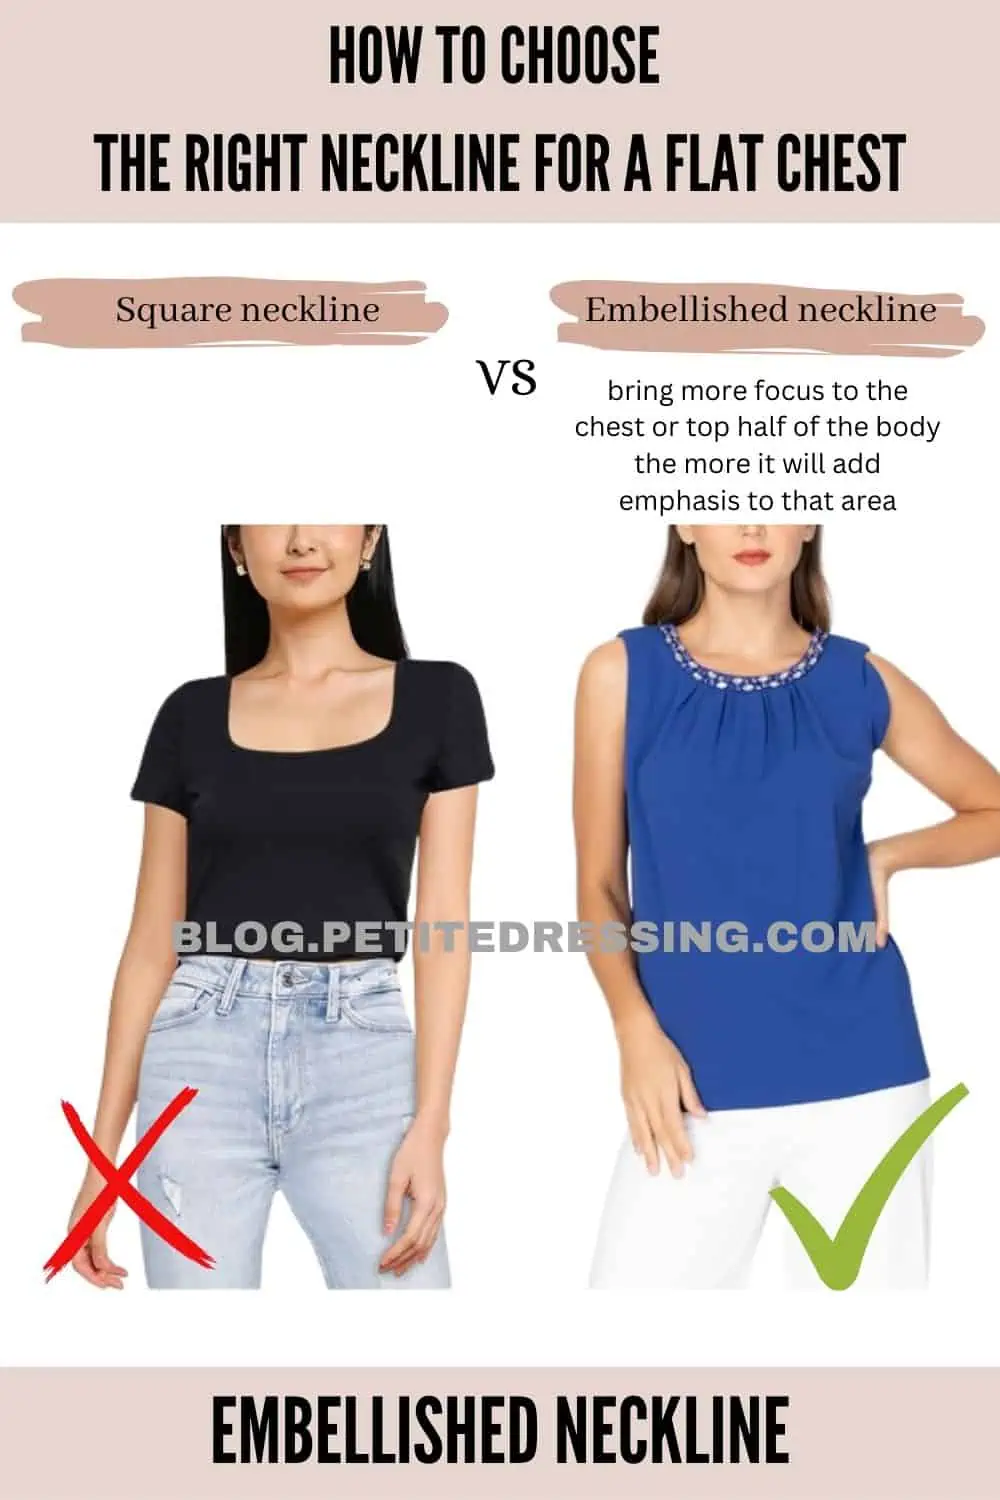 How to Choose the Right Neckline for a Flat Chest - Petite Dressing